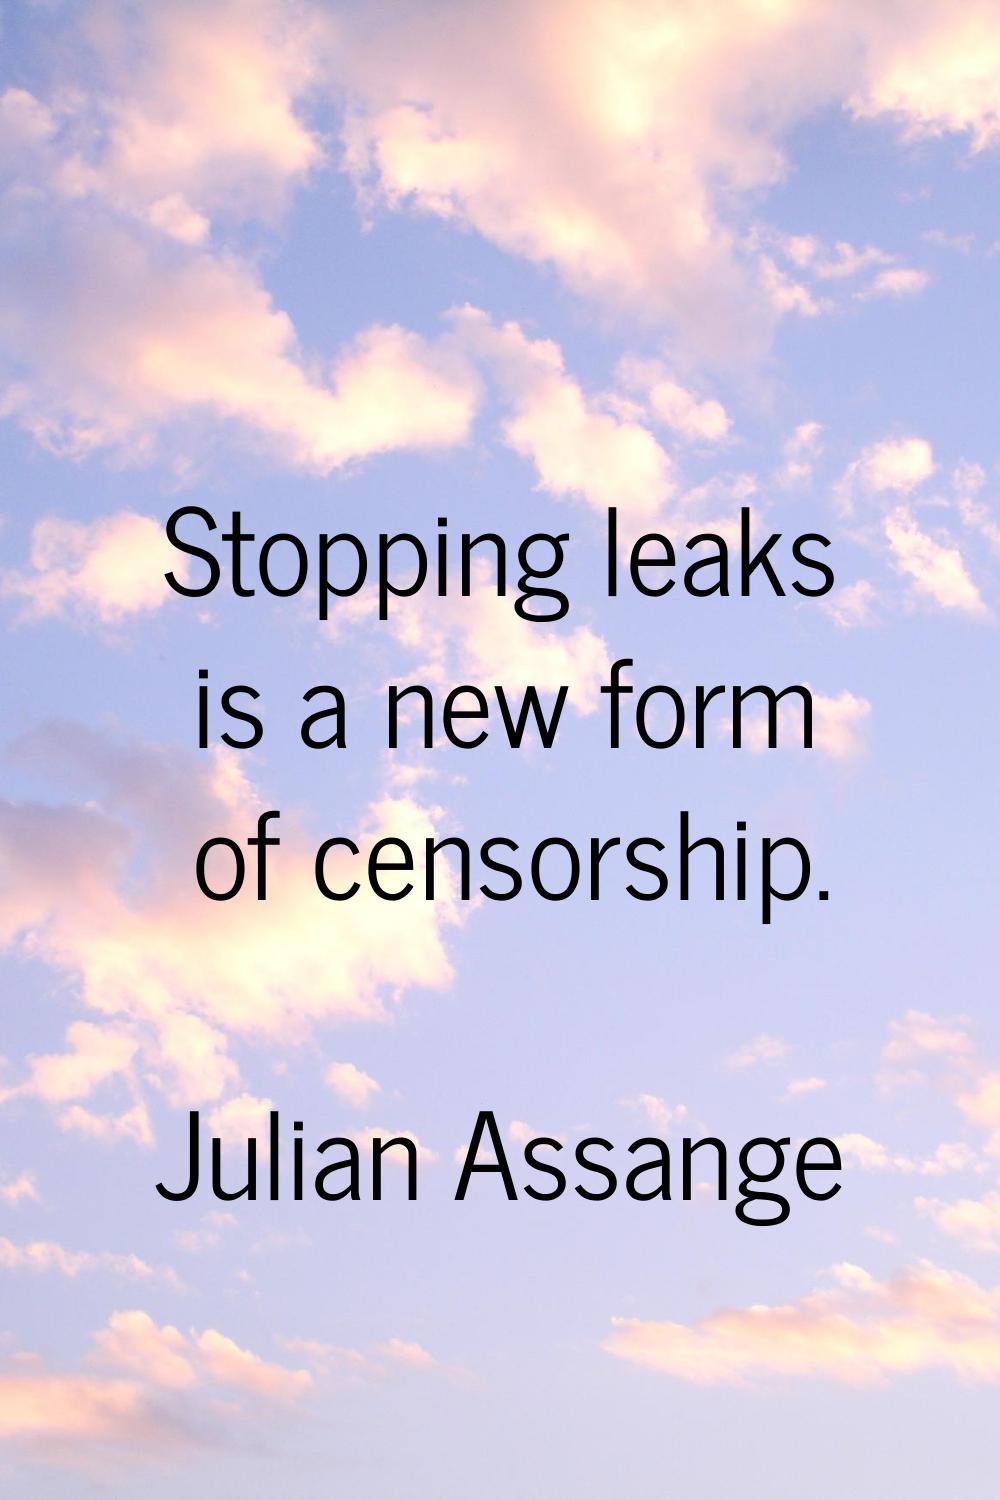 Stopping leaks is a new form of censorship.